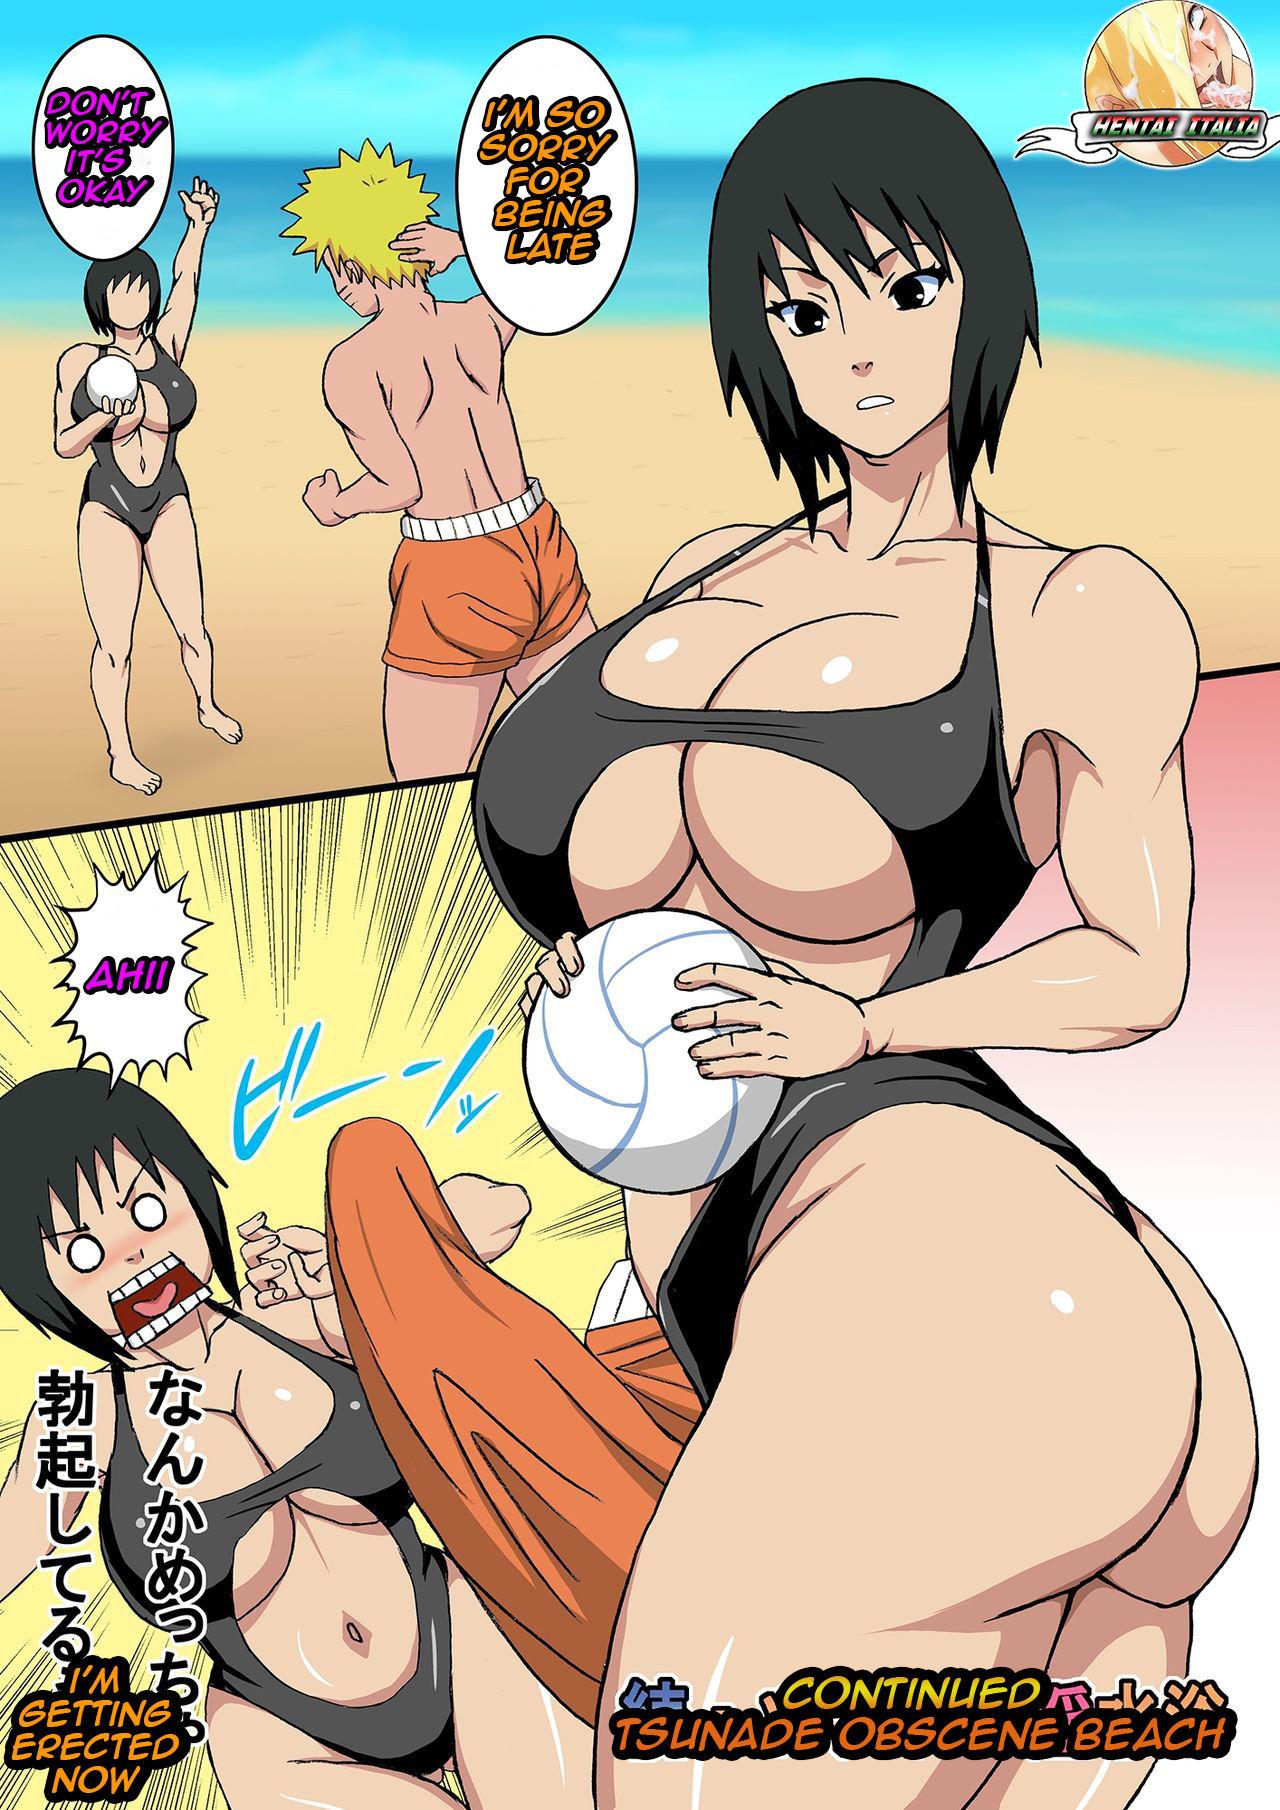 Blow Jobs Porn After Tsunade's Obscene Beach - Naruto Guys - Page 3